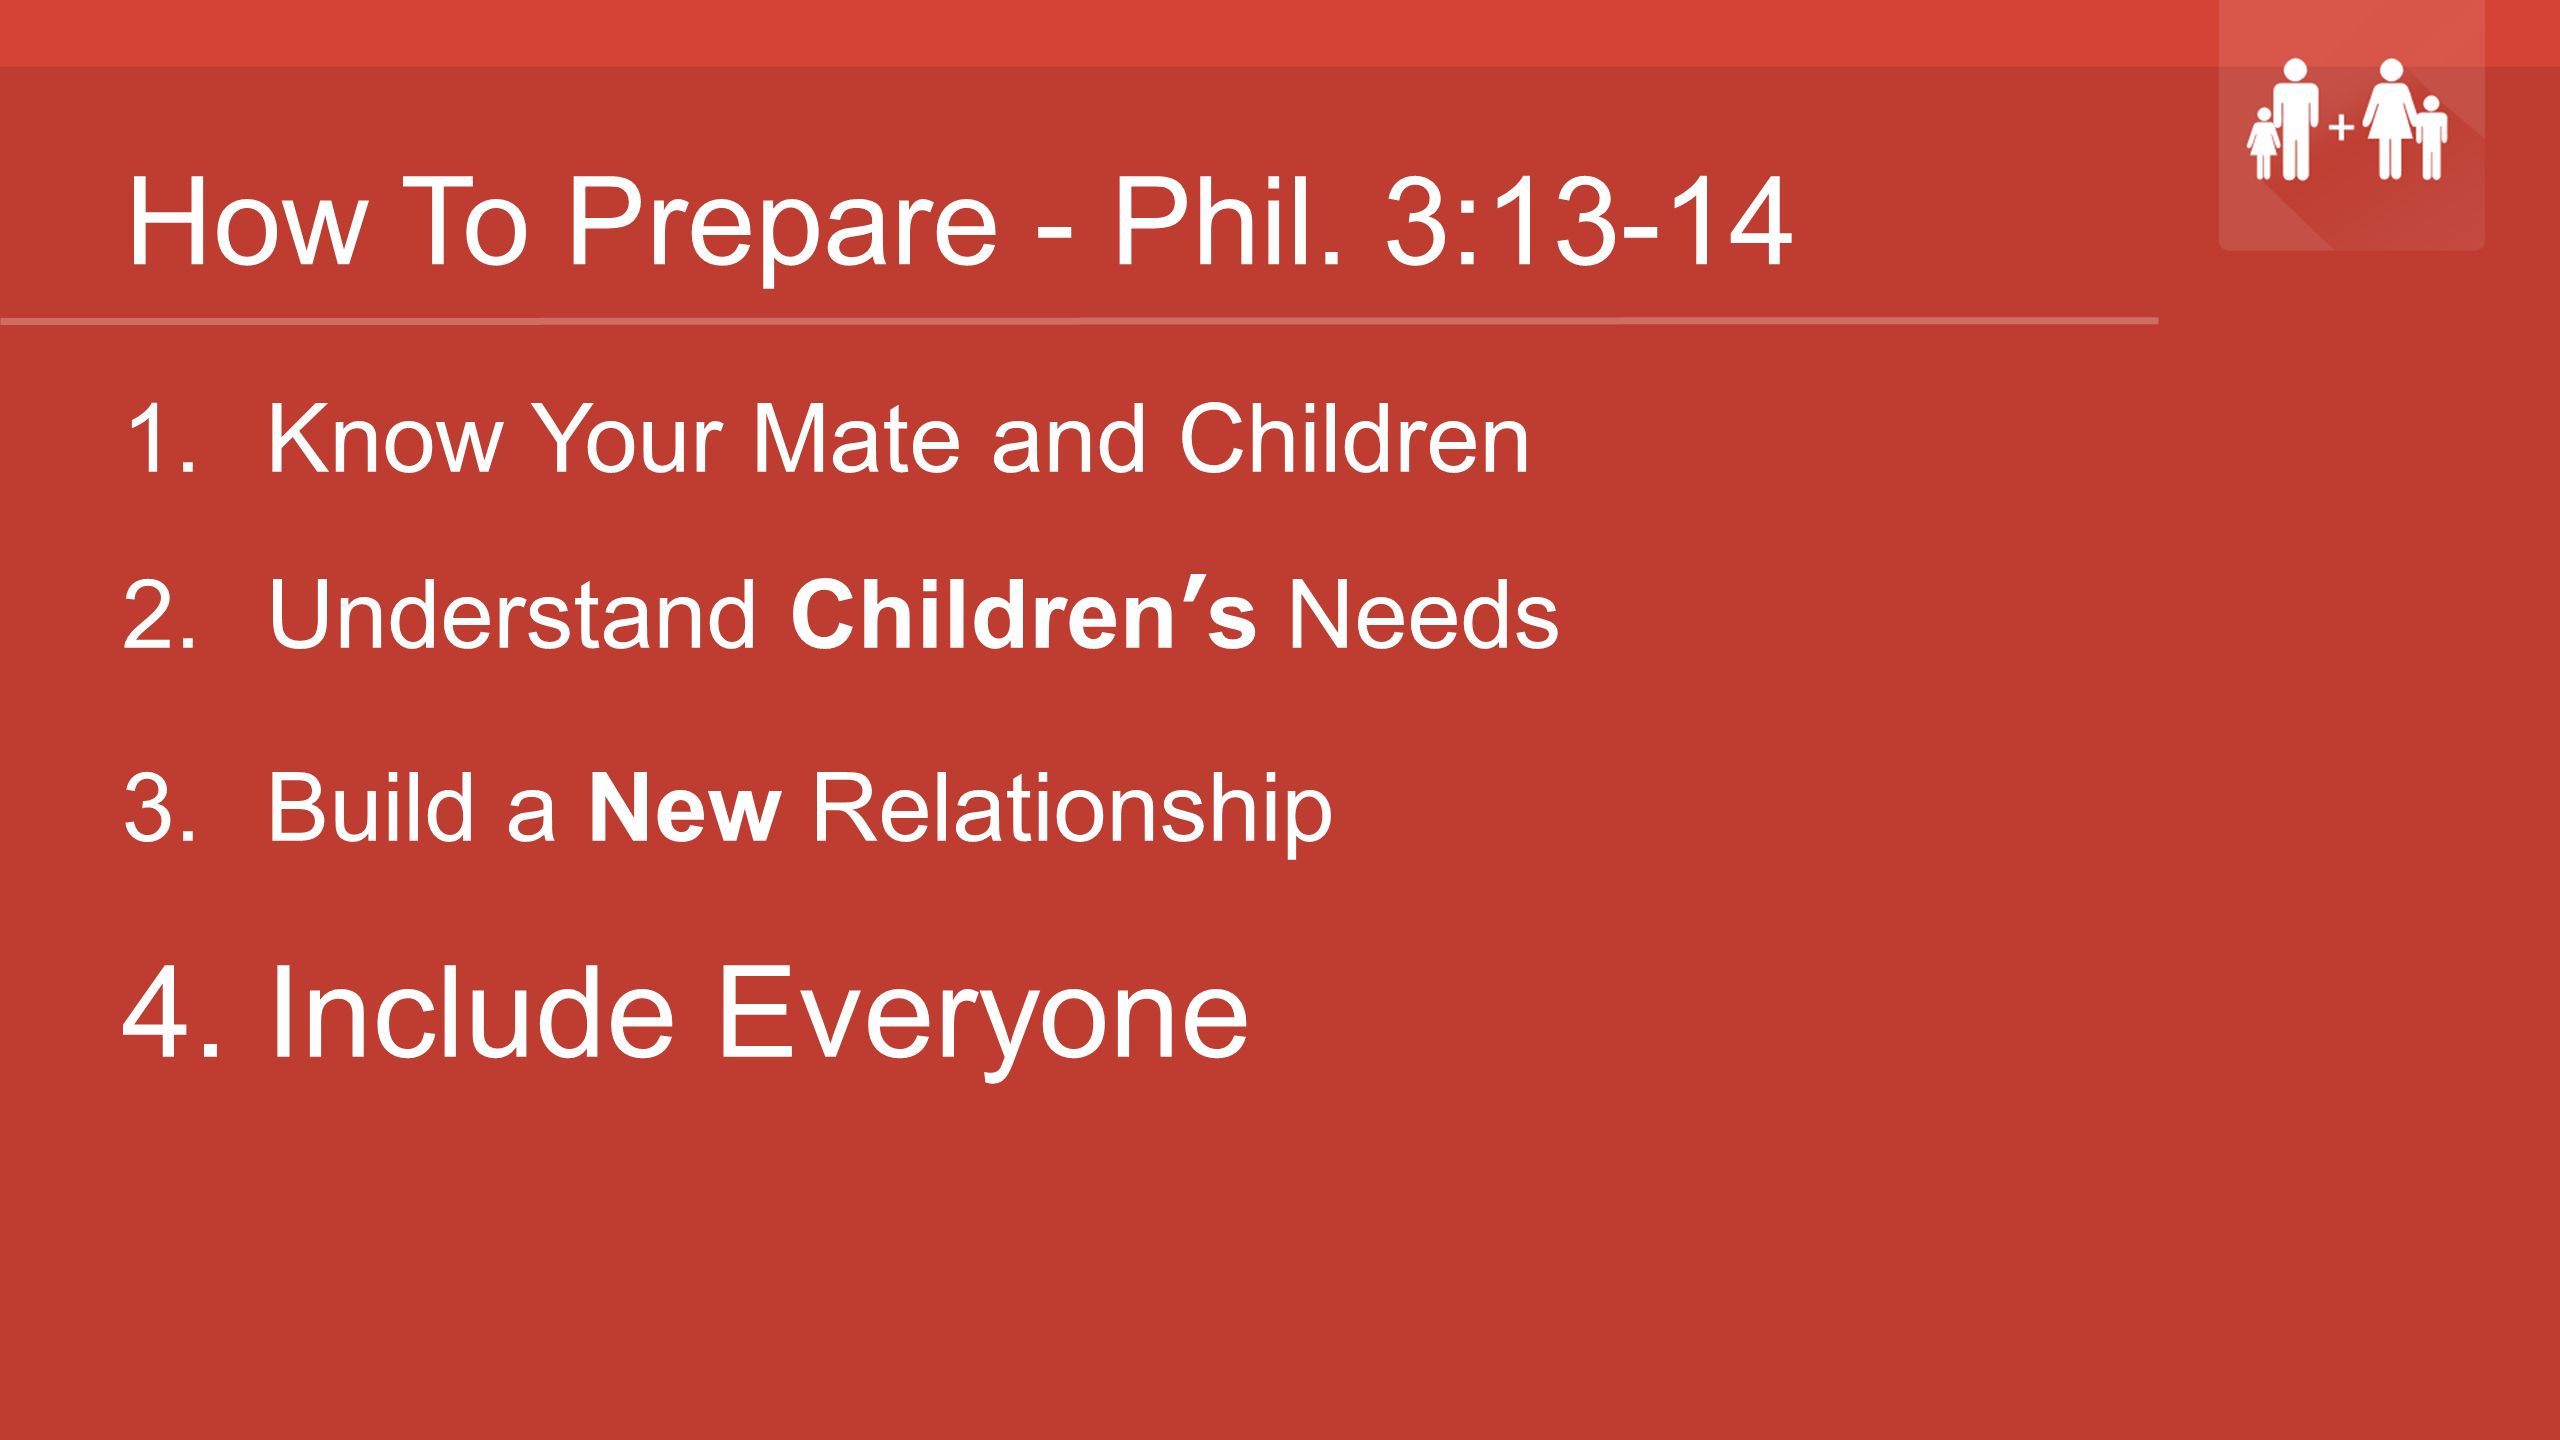 How To Prepare - Phil. 3: Know Your Mate and Children 2.